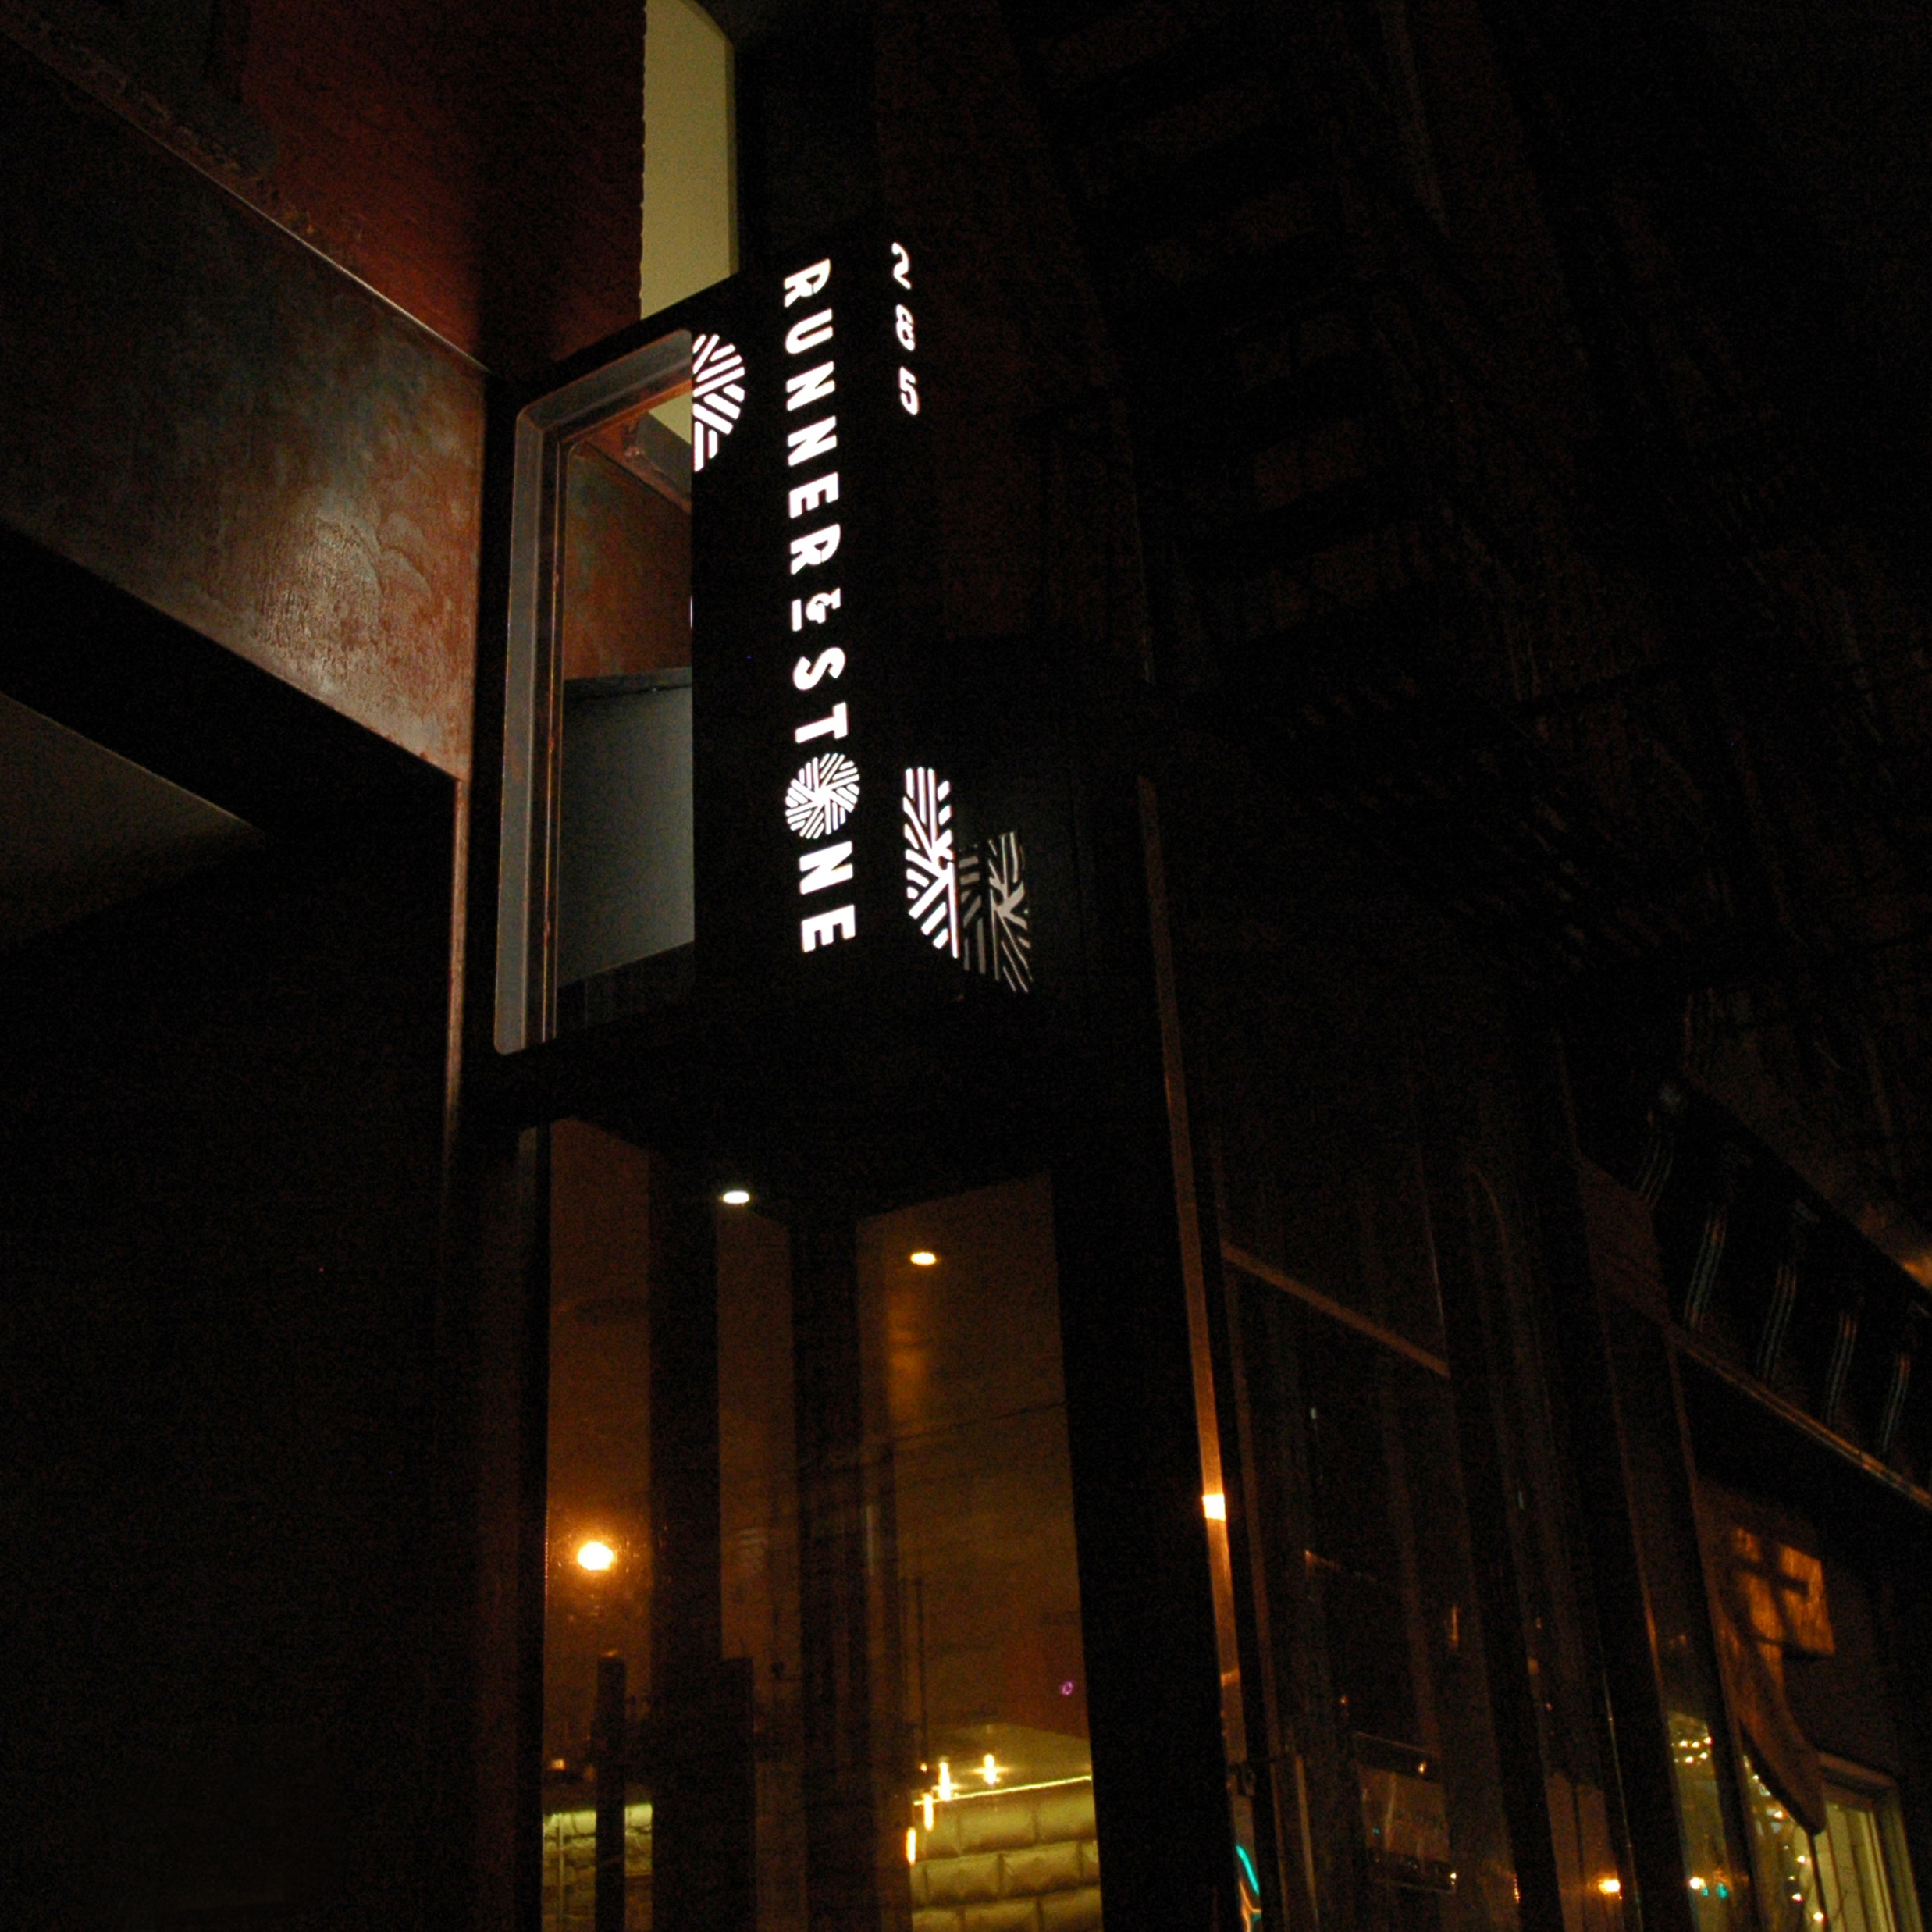 the illuminated exterior, punched steel storefront sign on the runner and stone facade